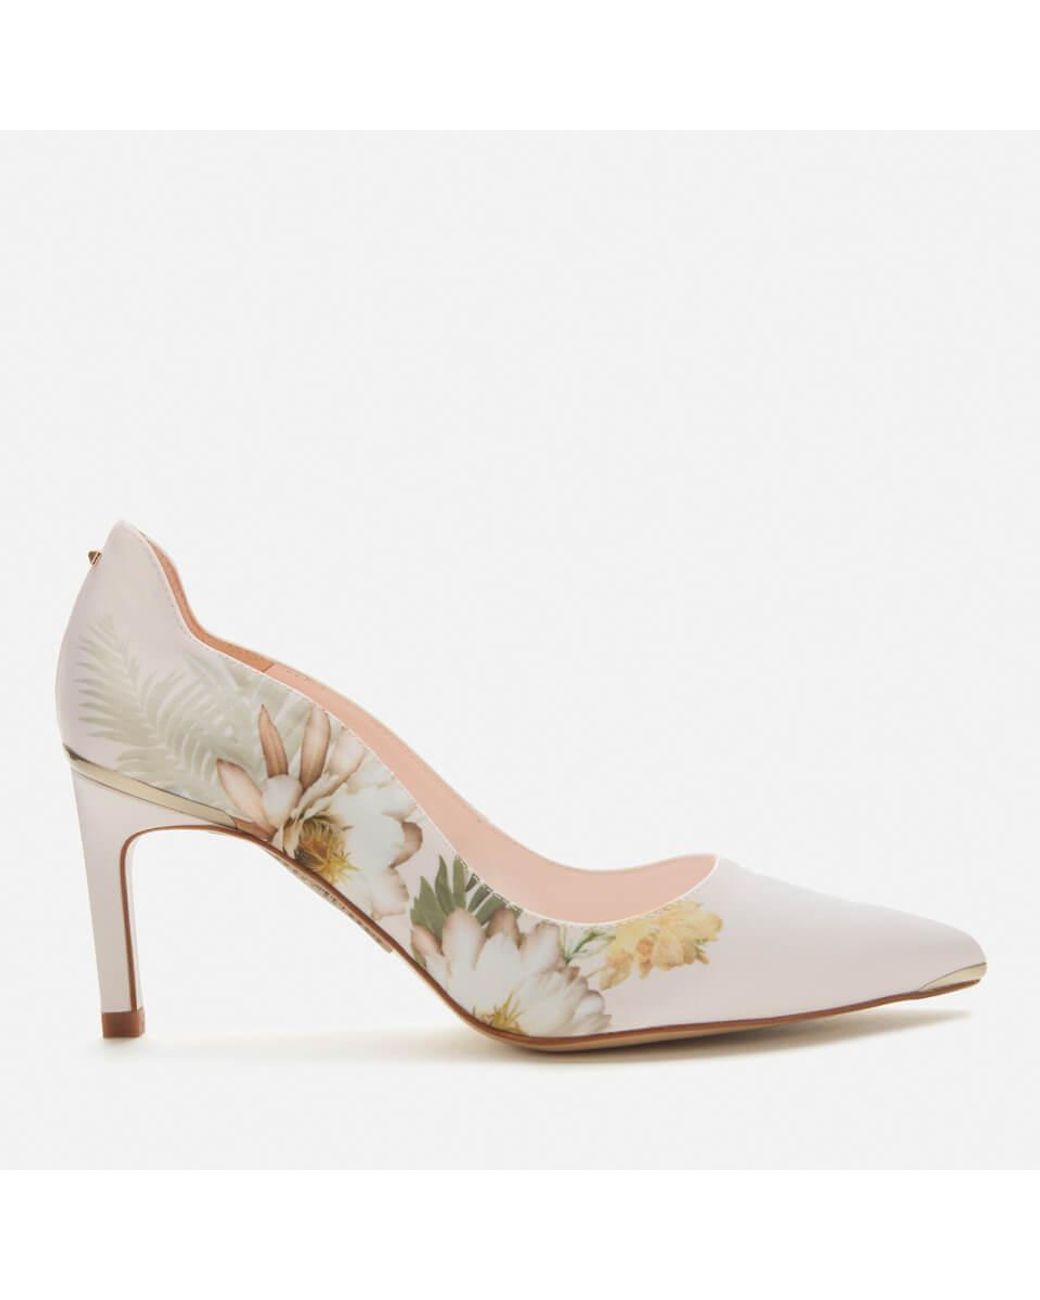 Ted Baker Erwiin Floral Court Shoes in Pink | Lyst Australia